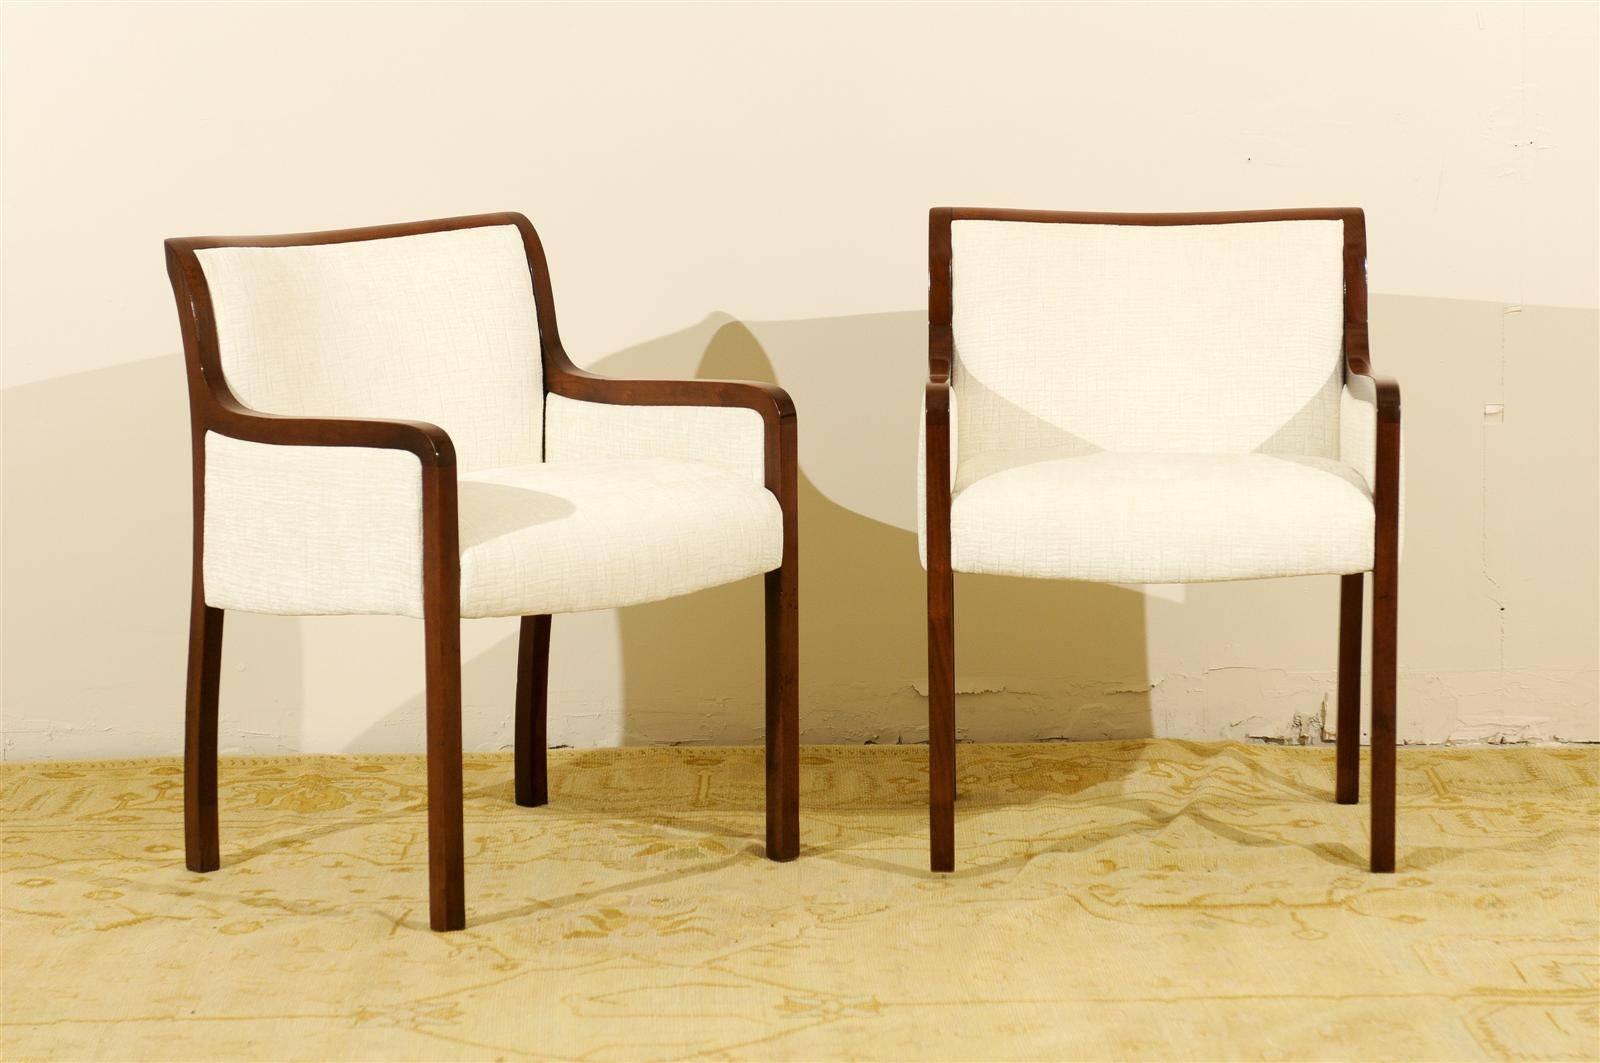 An exceptional pair of modern occasional chairs. Stout walnut construction highlighted by a fabulous rear leg and back detail. Beautifully made and wonderfully comfortable. While the pieces are unmarked, the design and craftsmanship are consistent